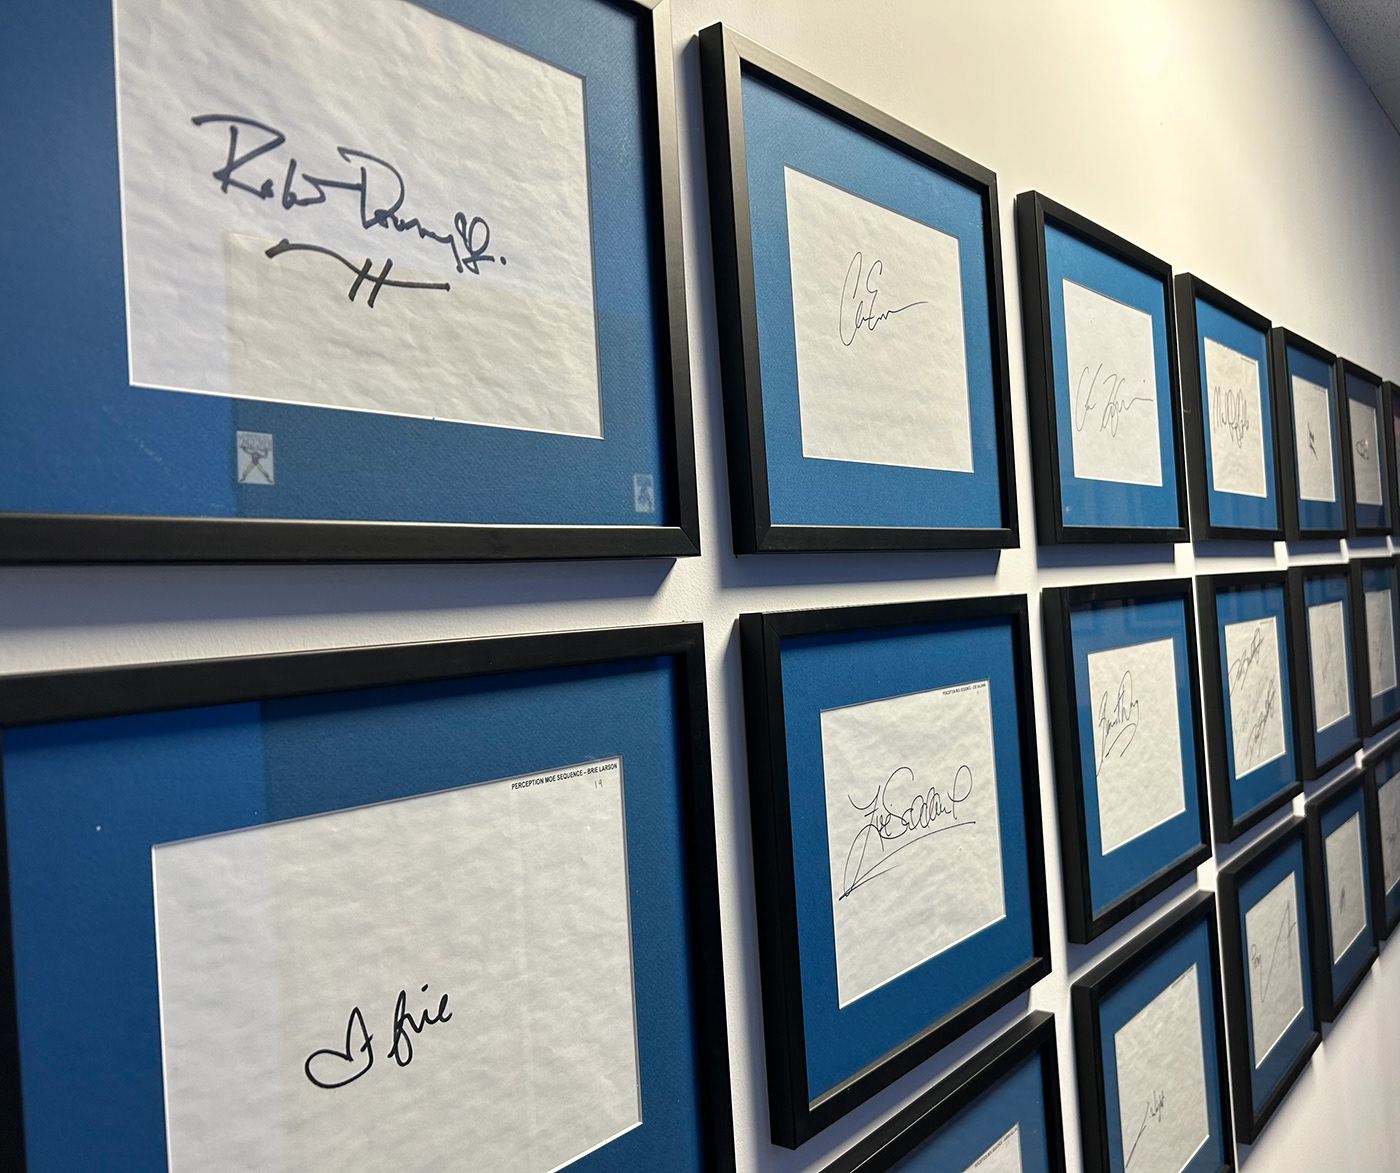 Signatures from the Avengers in the Perception studio